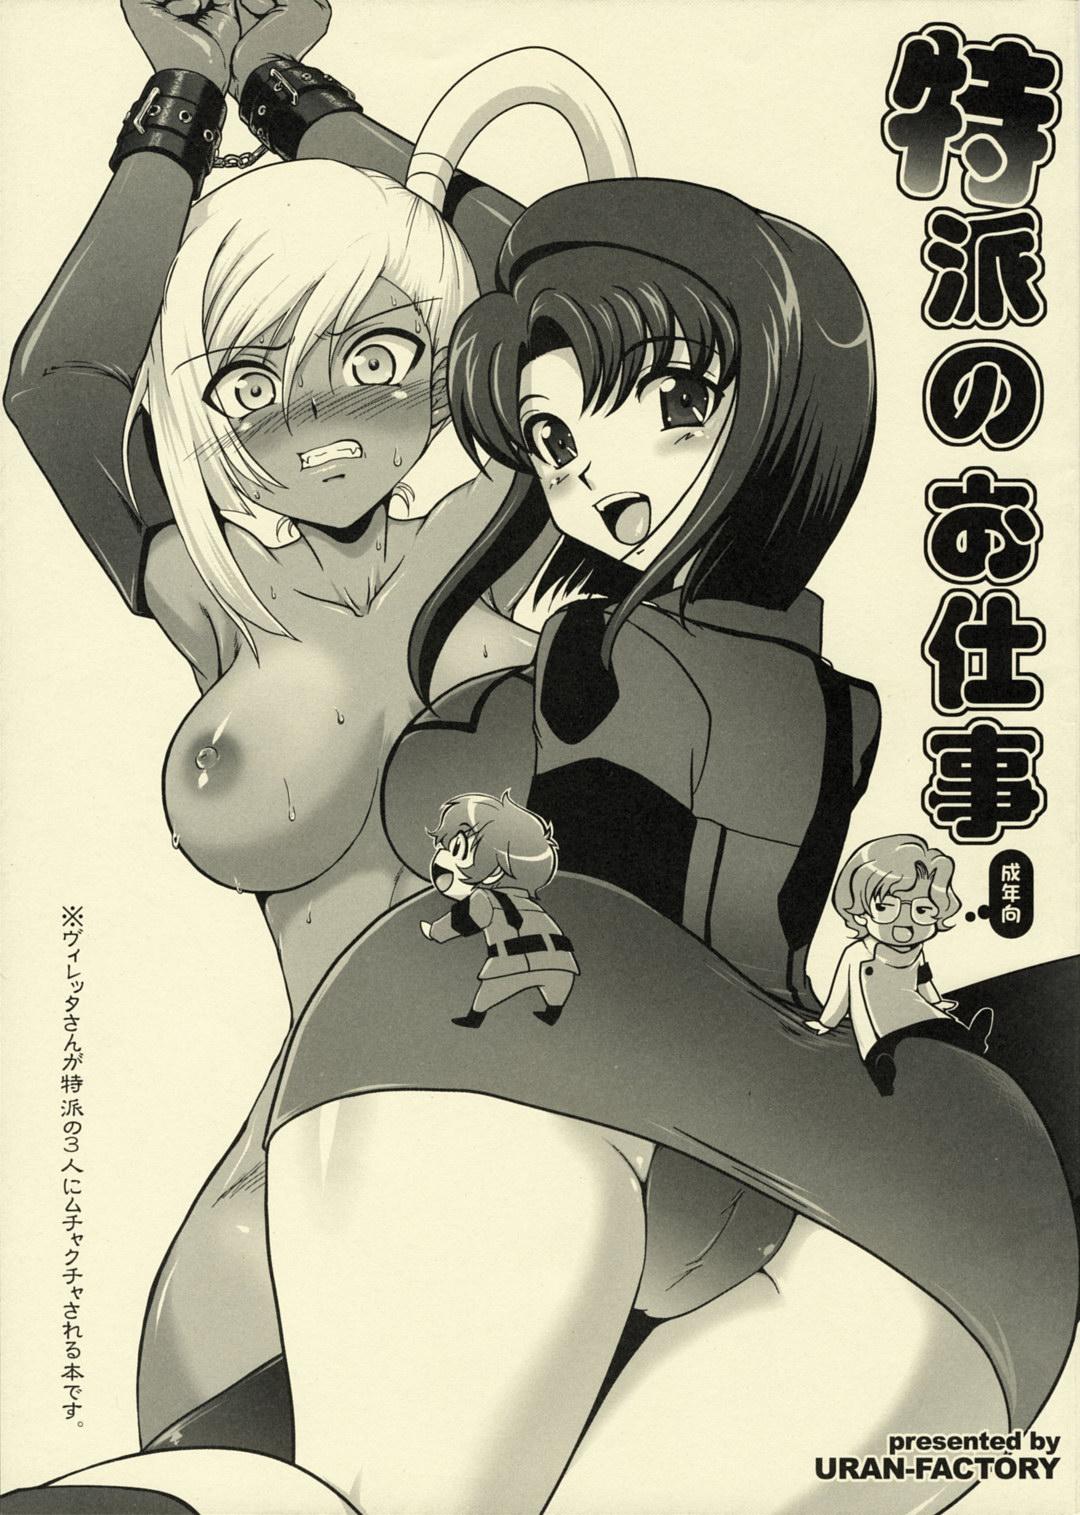 Load Tokuha no Oshigoto | Special Envoy's Work - Code geass Amateur Teen - Page 1